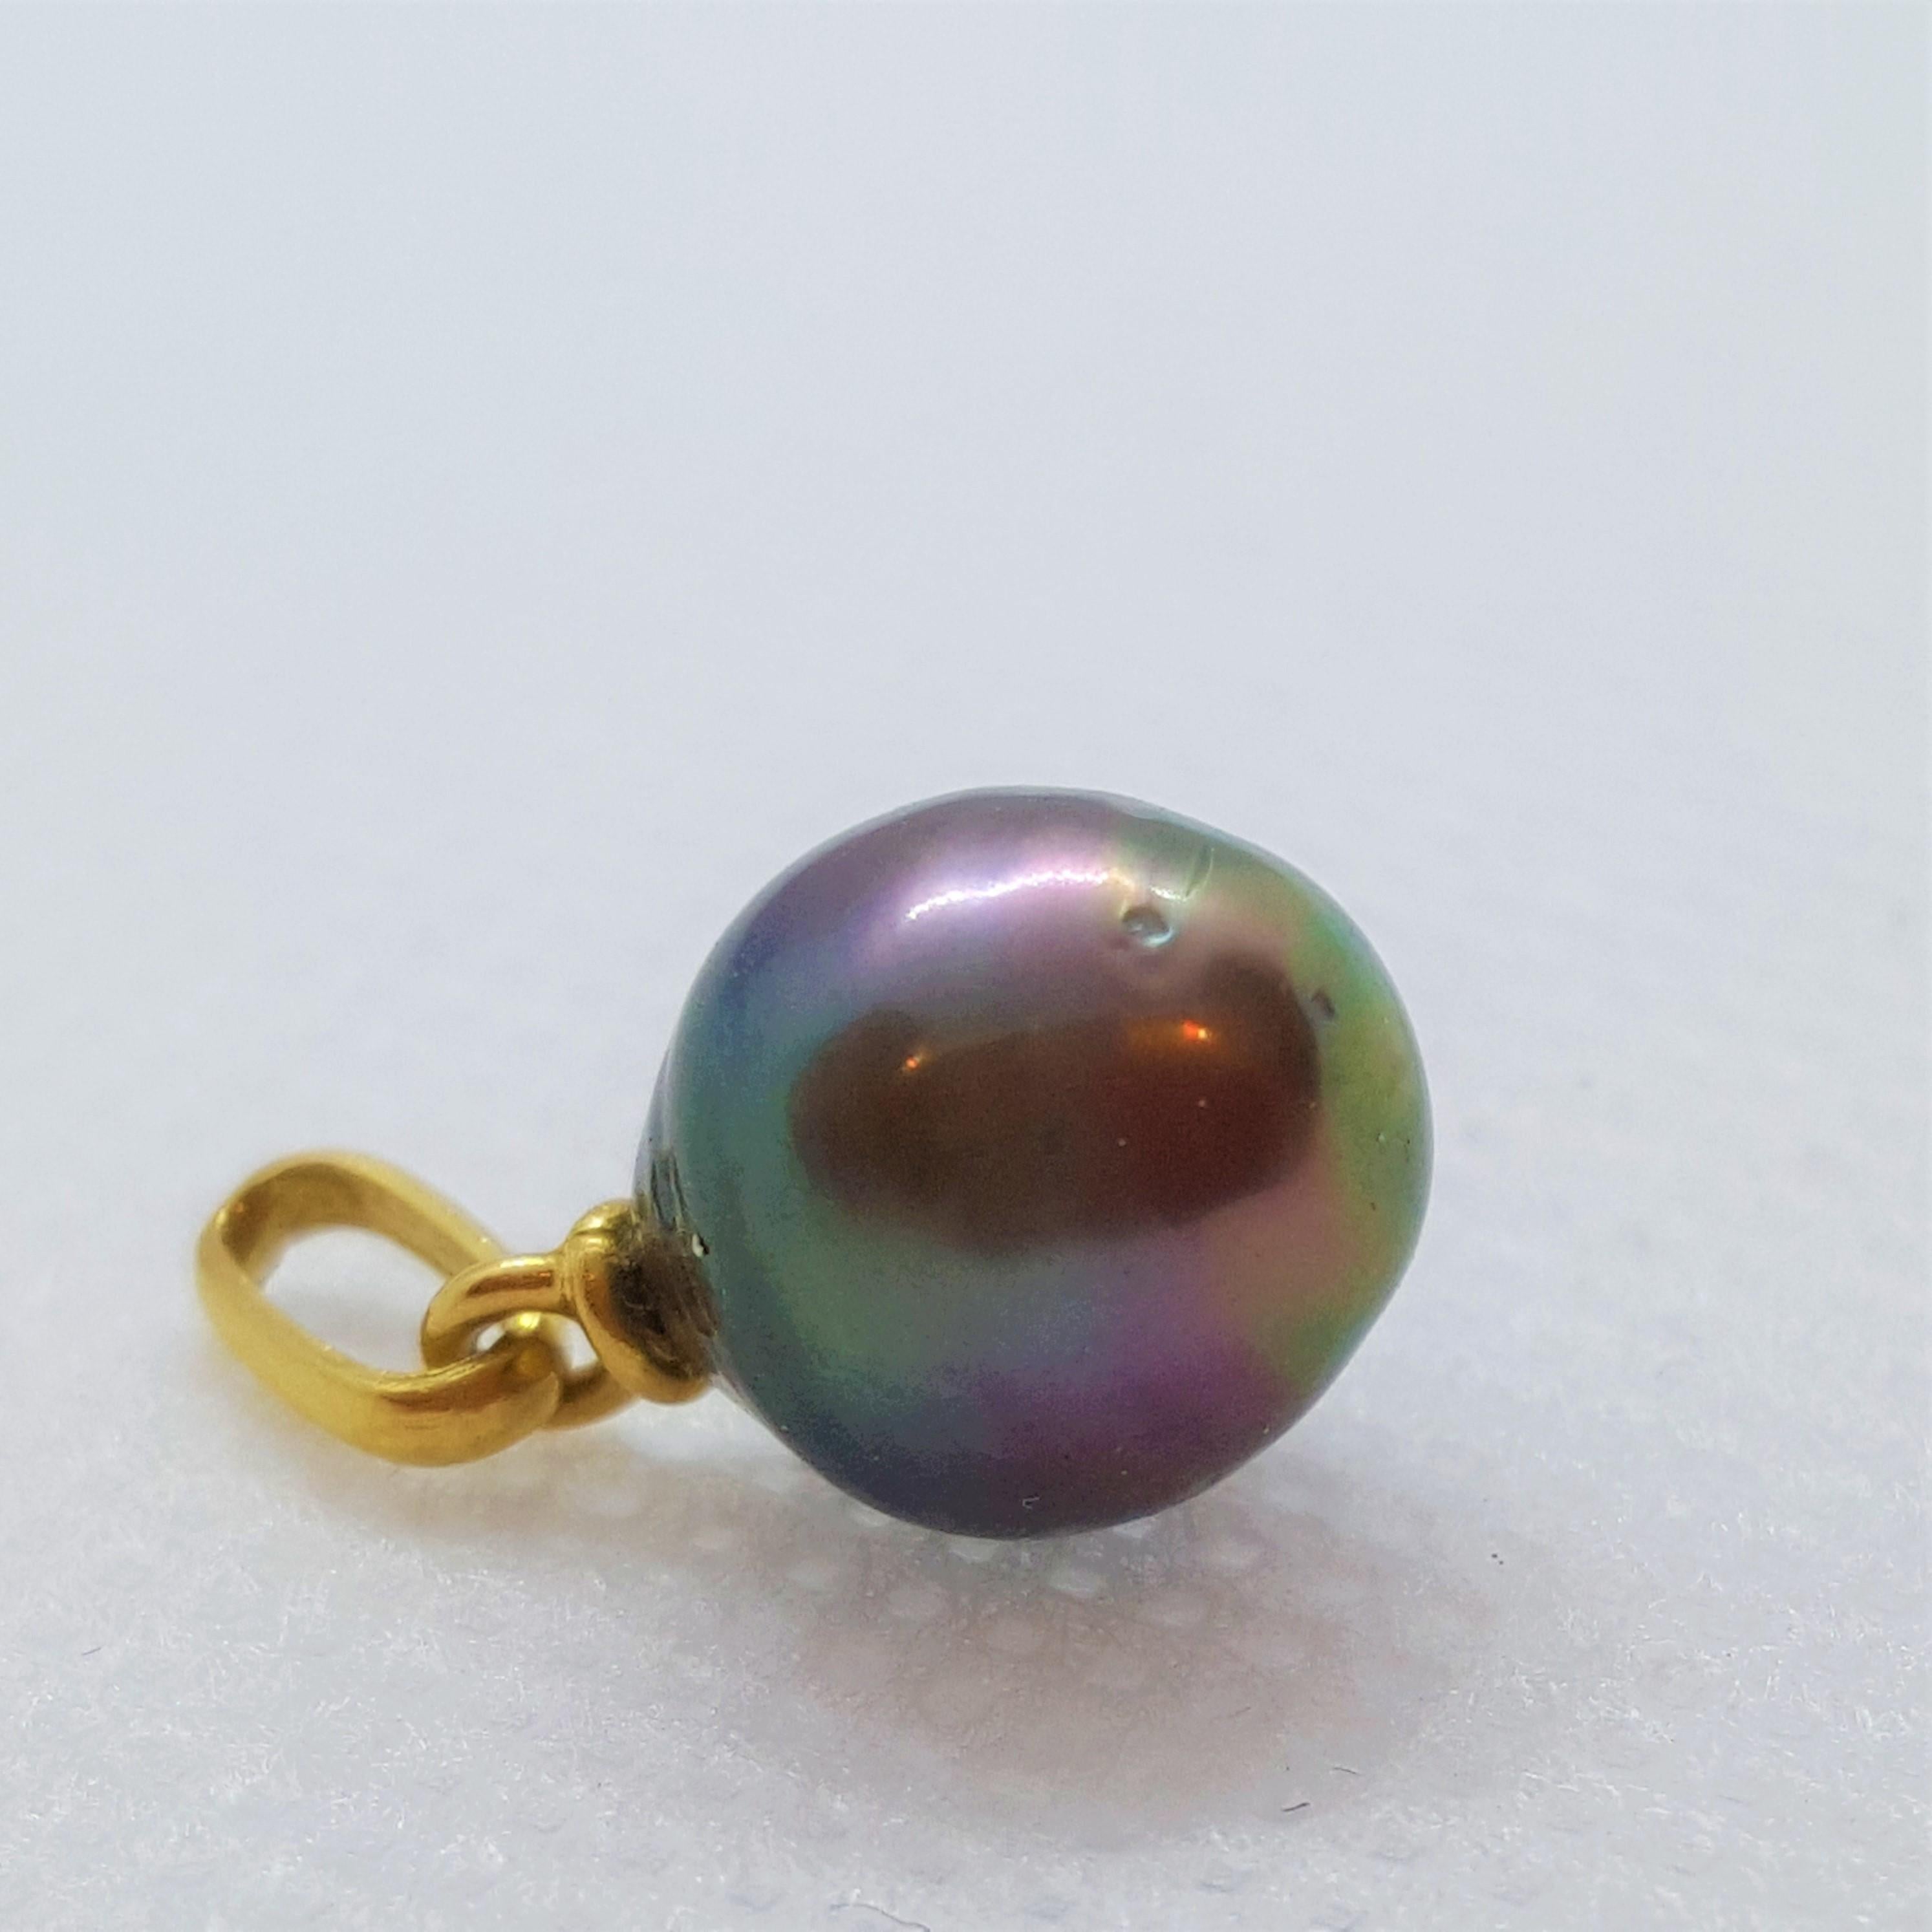 A beautiful 8.8mm Tahitian pearl with colors of peacock, eggplant, and gray set in a 14kt yellow gold pendant with bail. The pearl has a nice luster and clean nacre. The chain is sold separately.  We can assist in ordering you a chain in your length